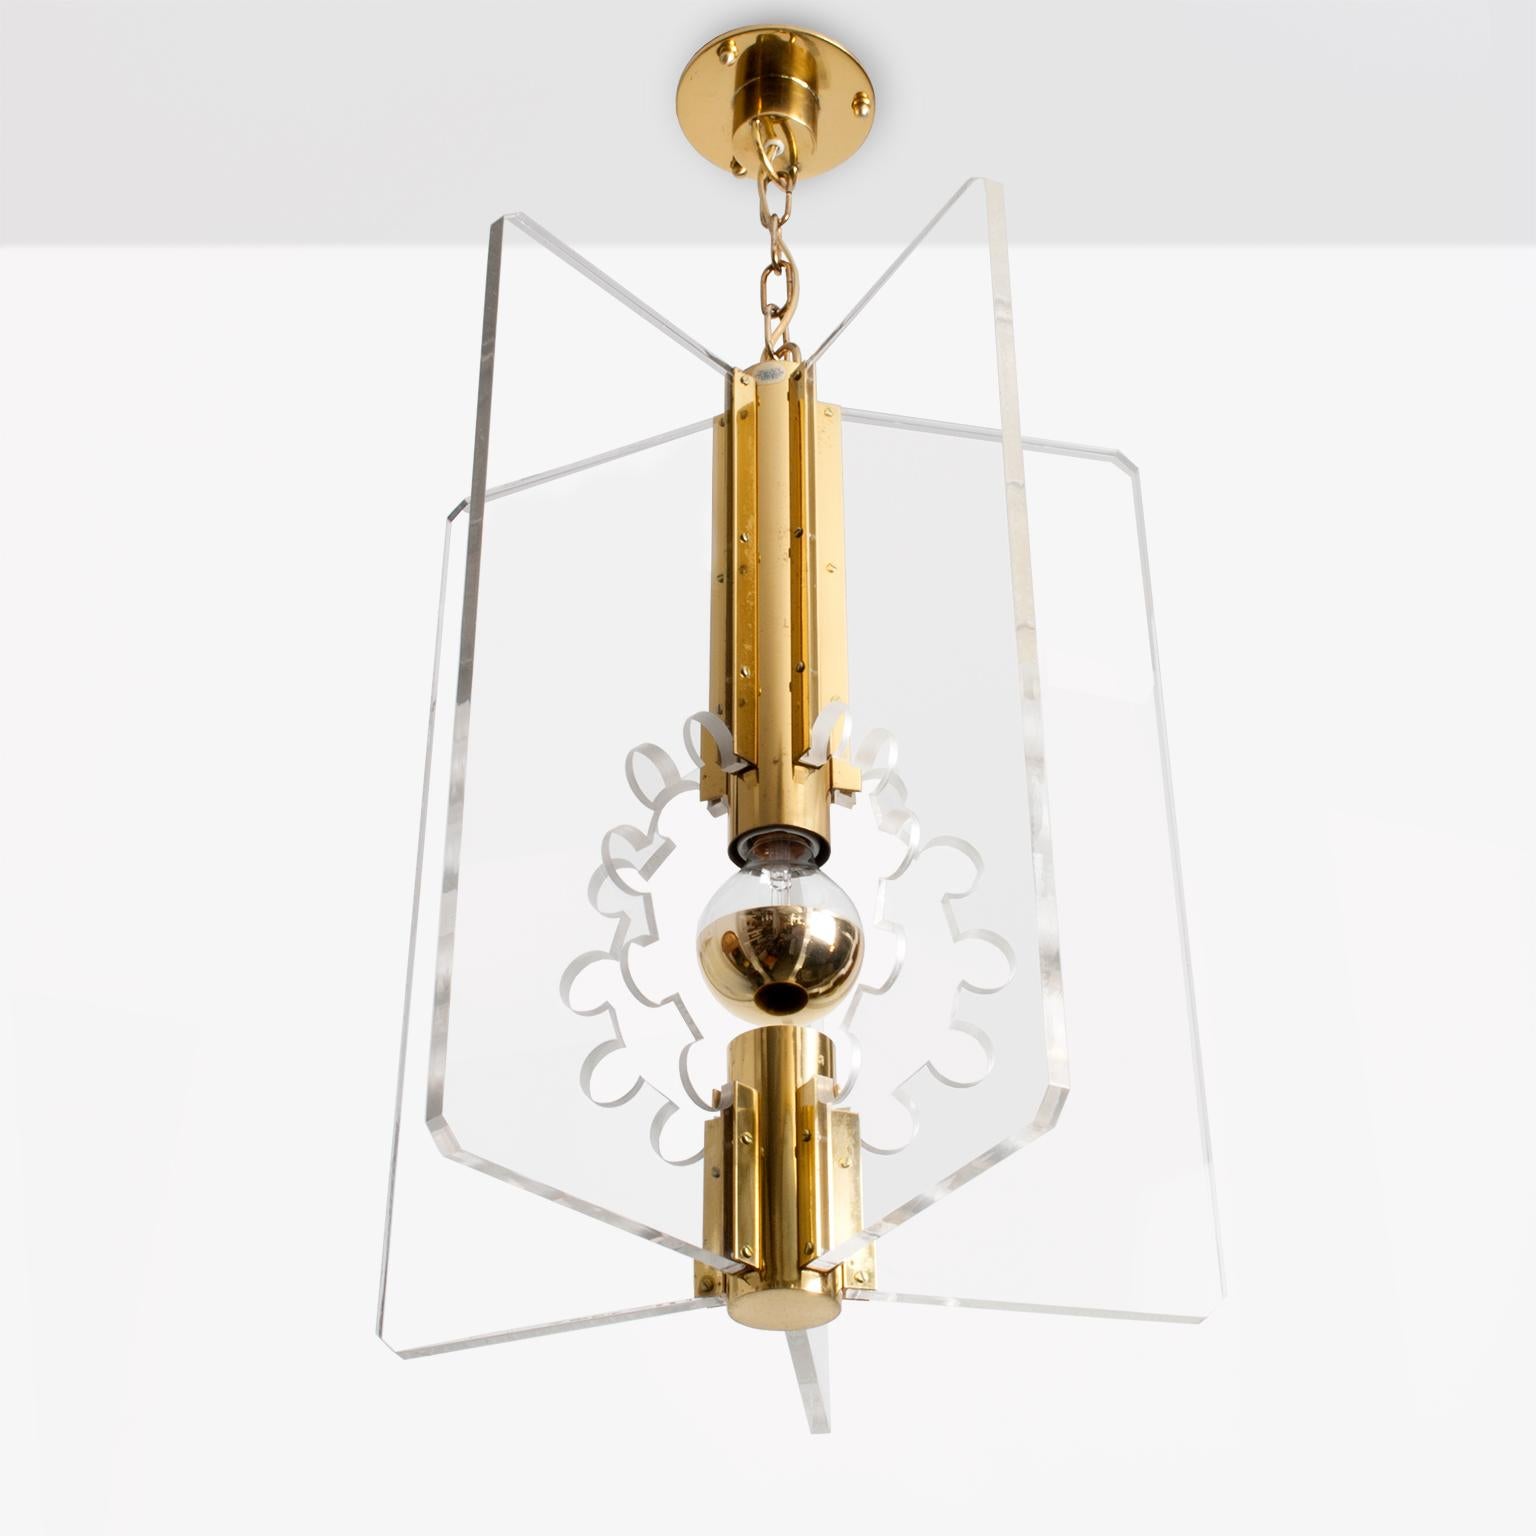 Swedish Mid-Century Modern polished brass pendant or lantern with five Lucite panels featuring a 